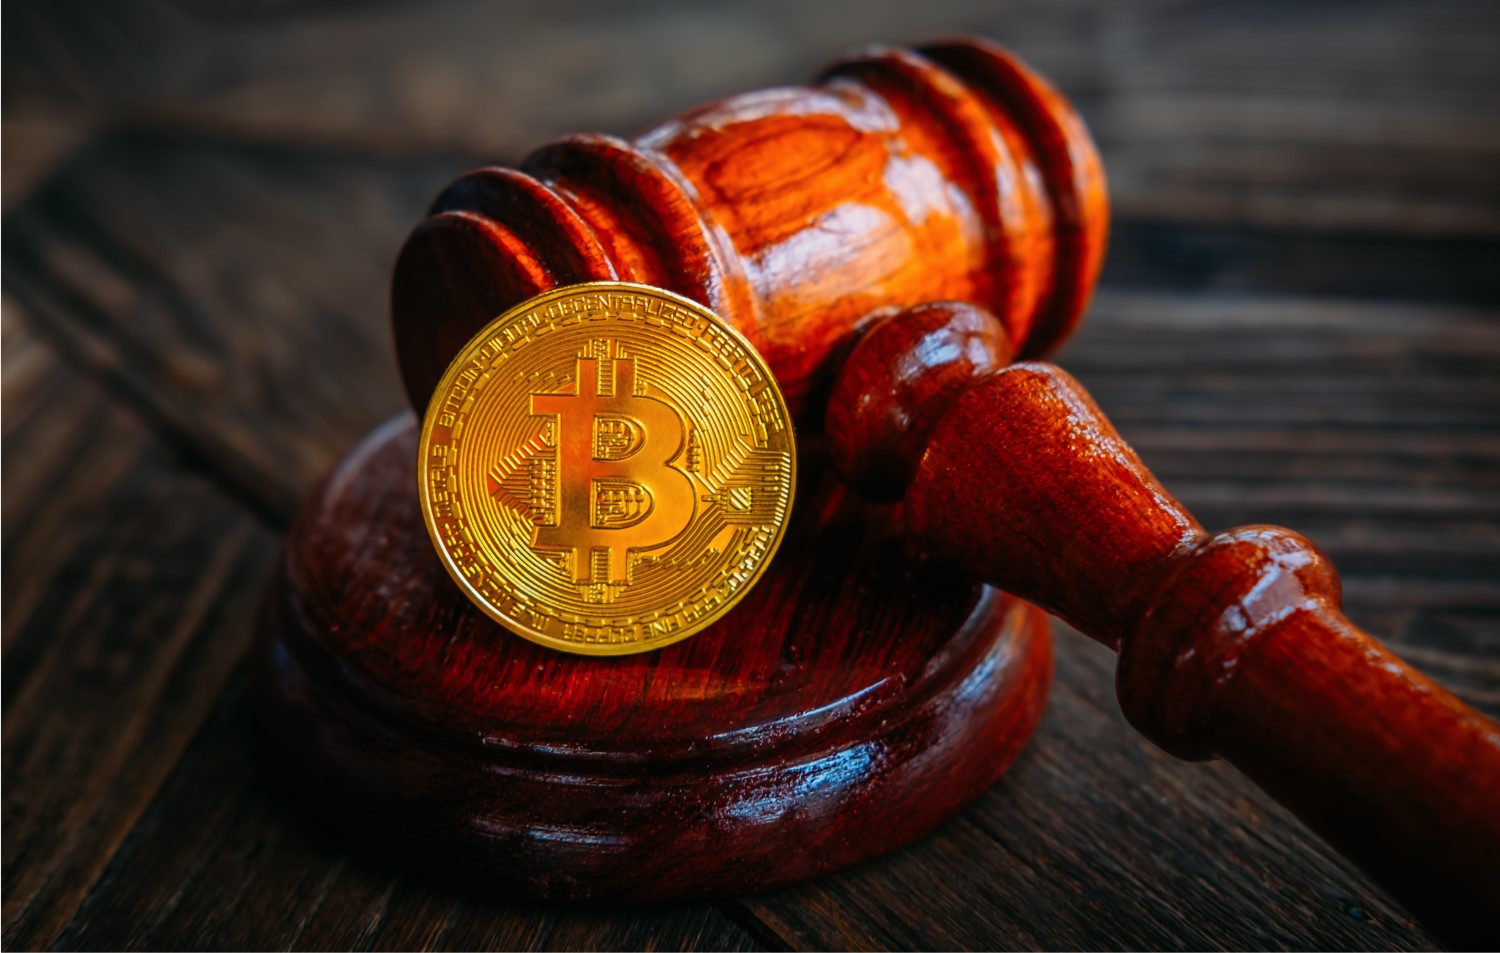 Bitmain Faces $5 Million Lawsuit Over Alleged Unauthorized Crypto Mining